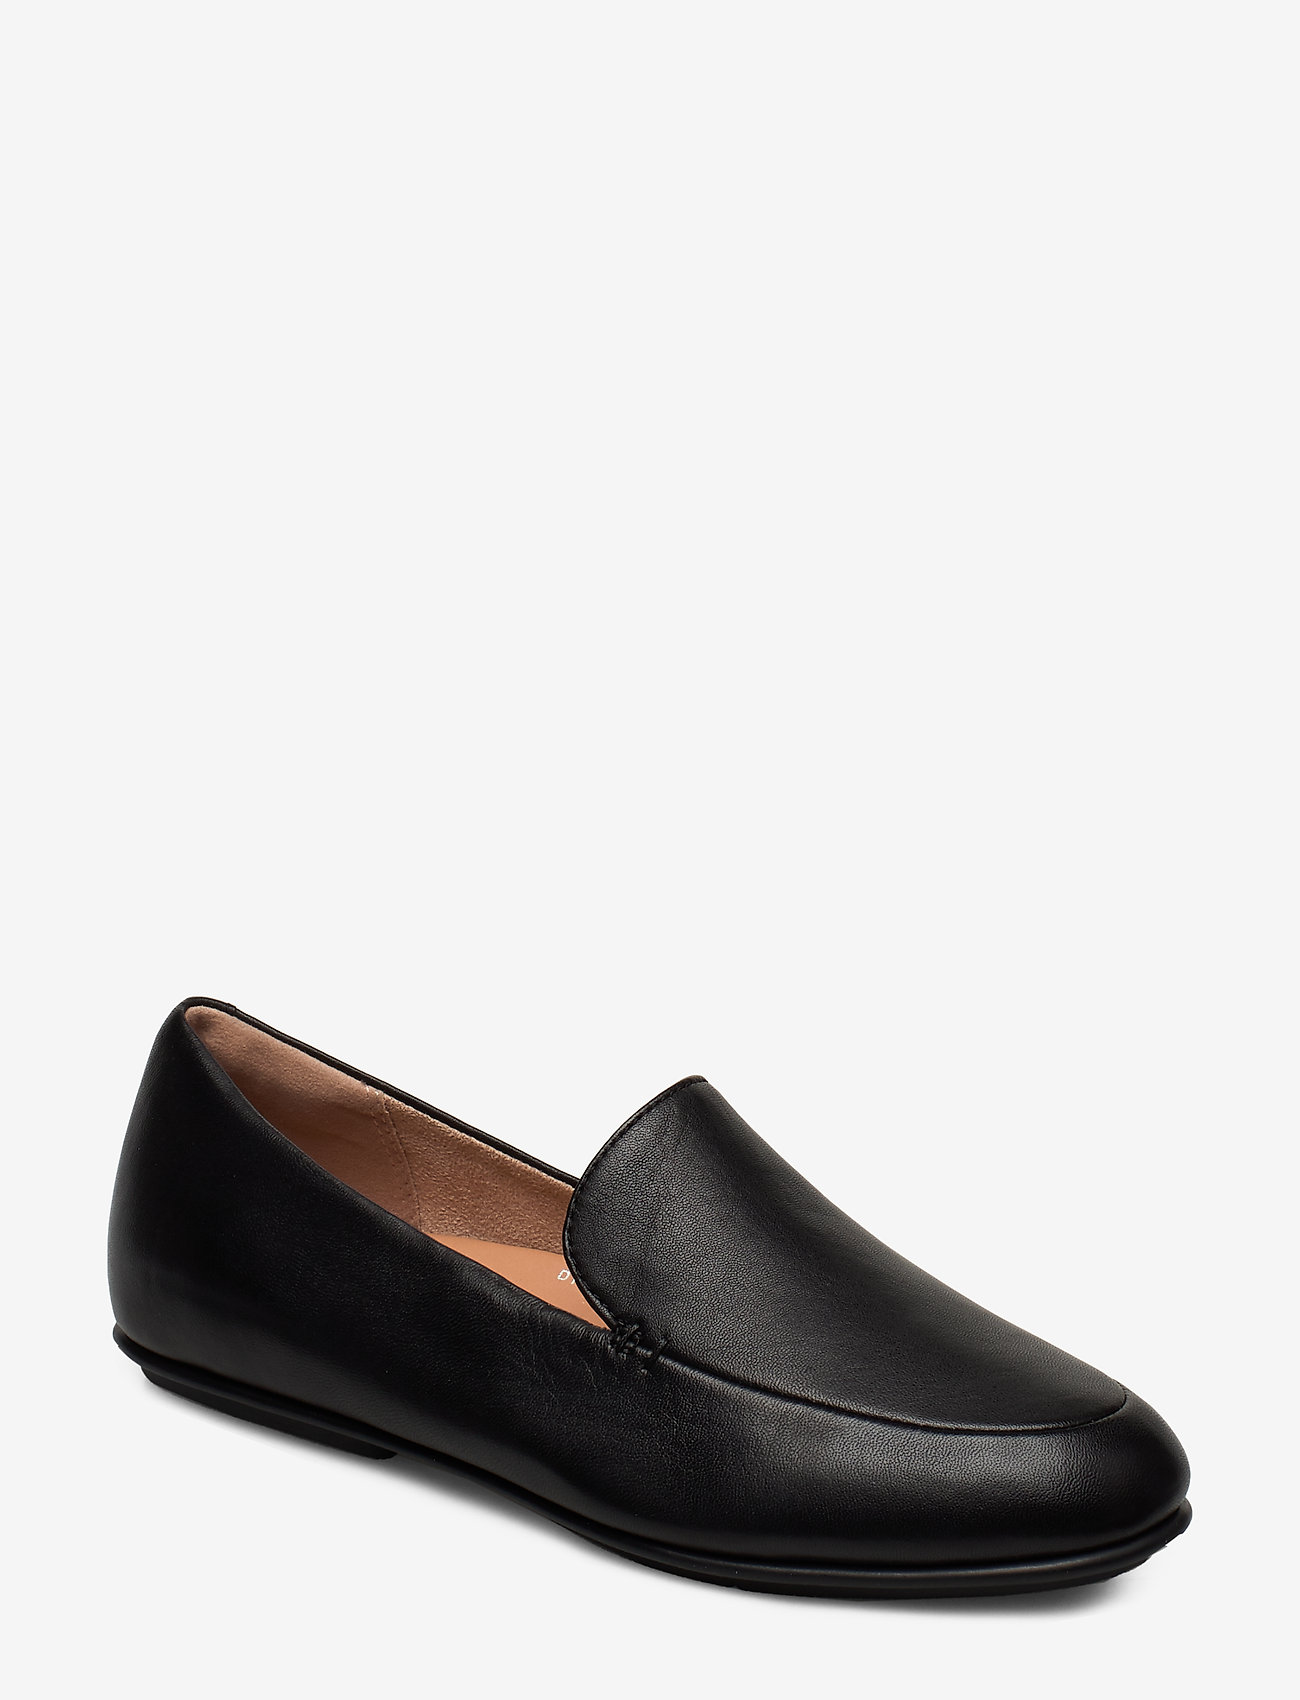 Lena Loafers (All Black) (71.50 